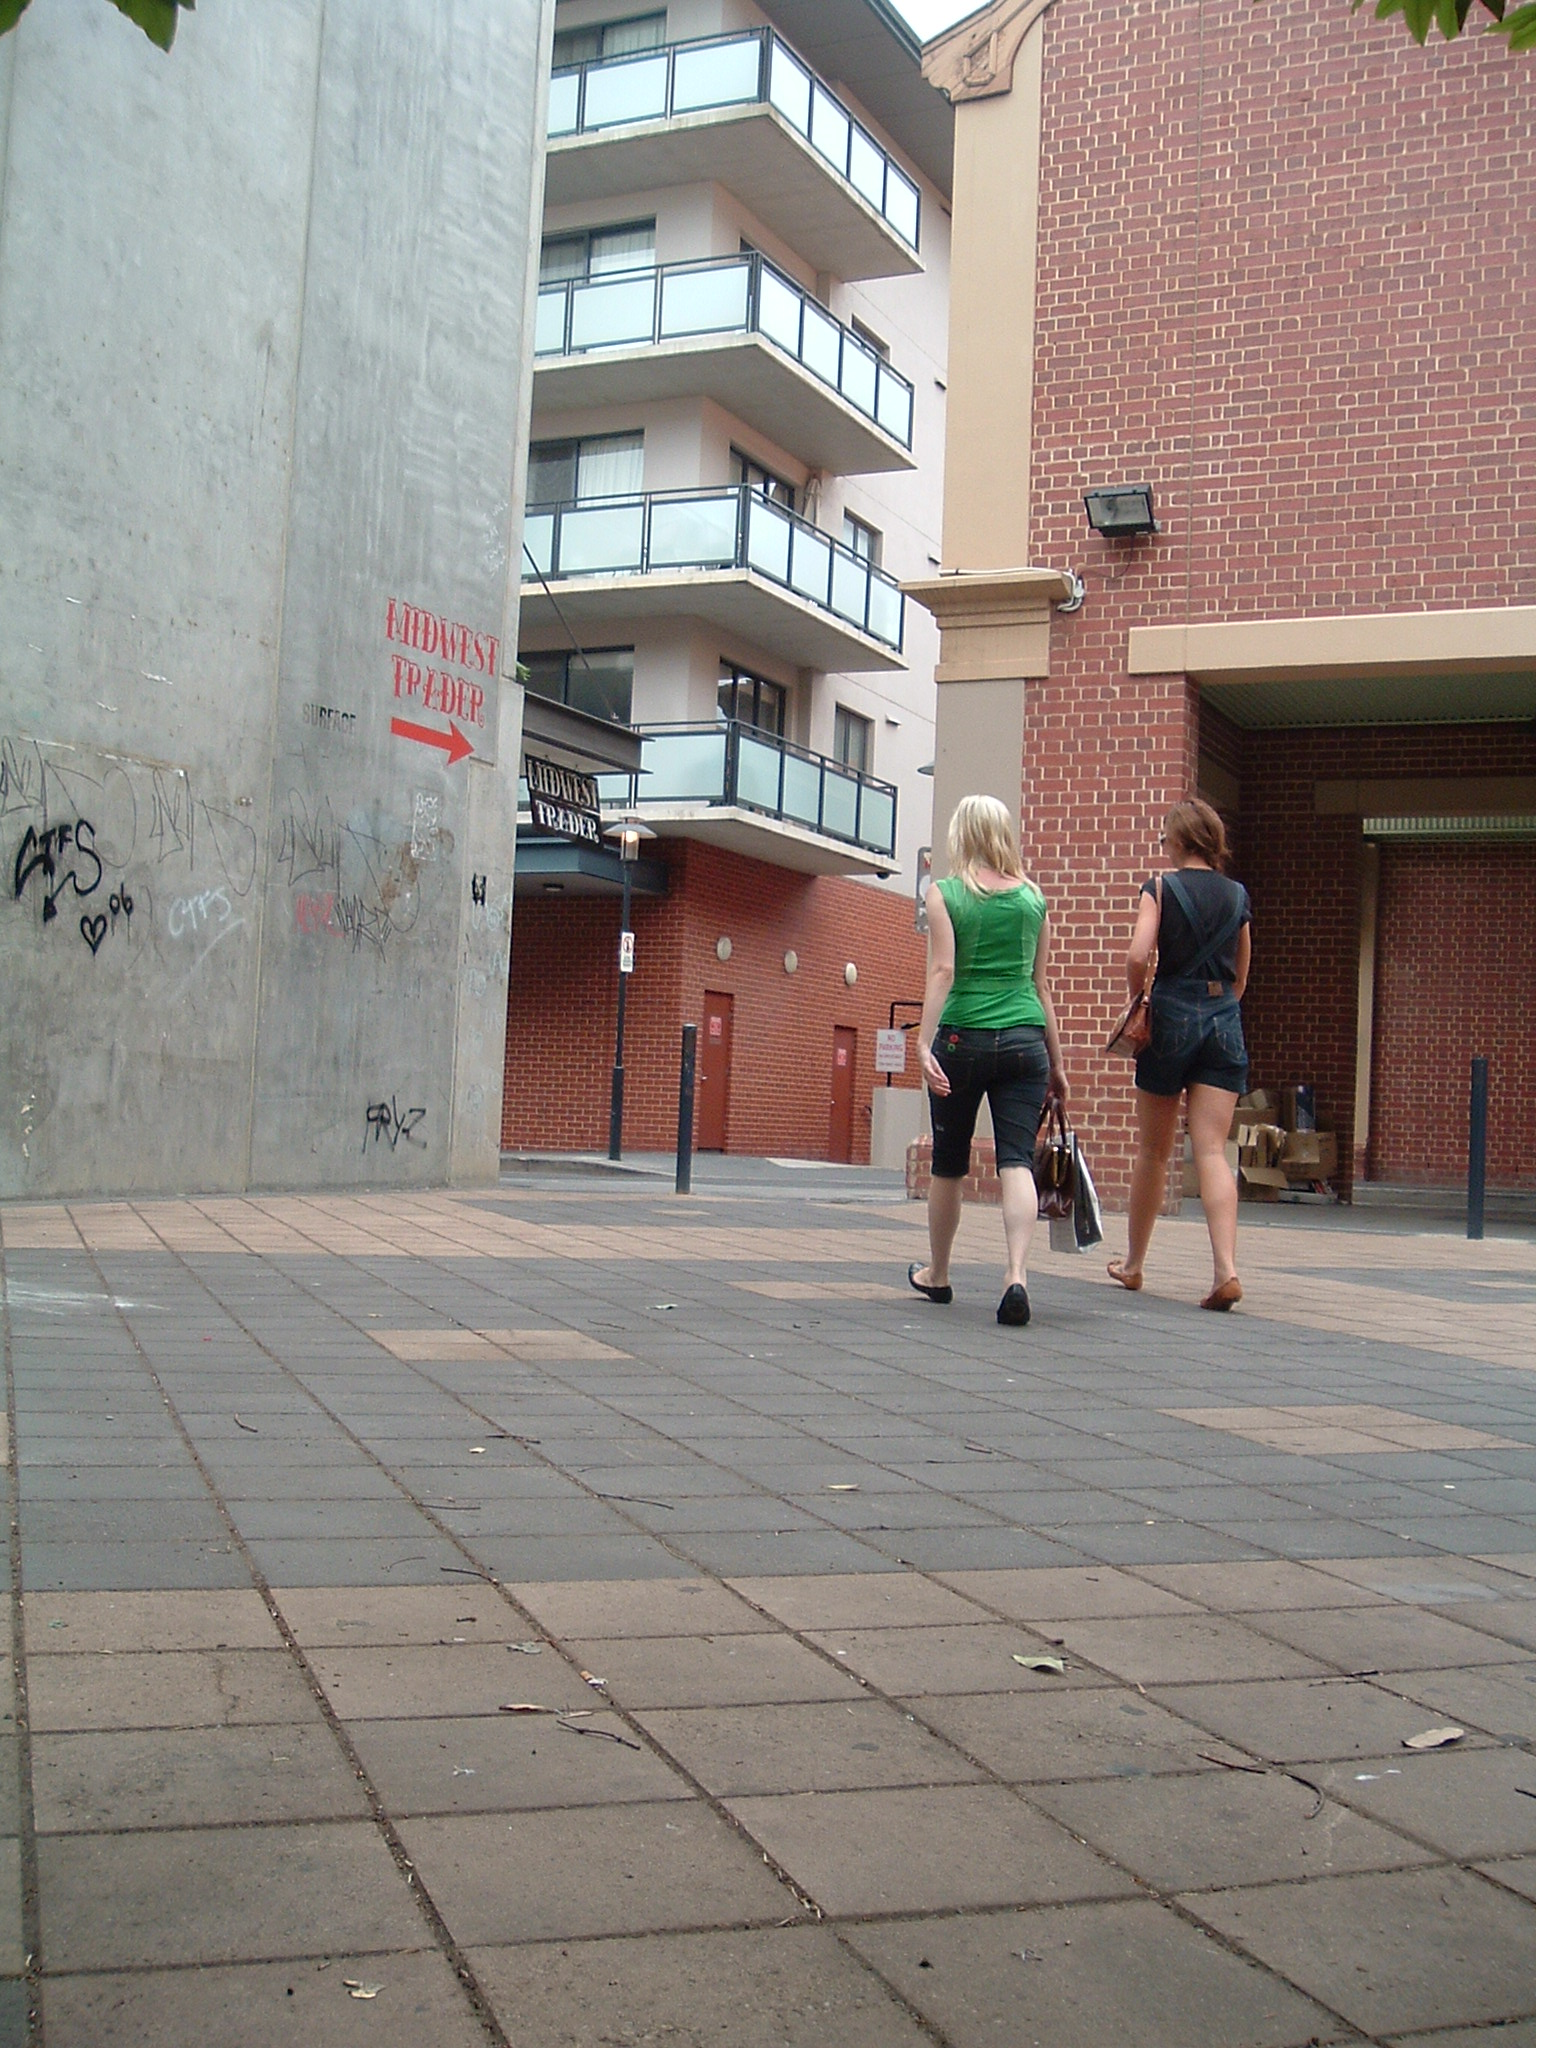 Photograph of two girls walking with shopping